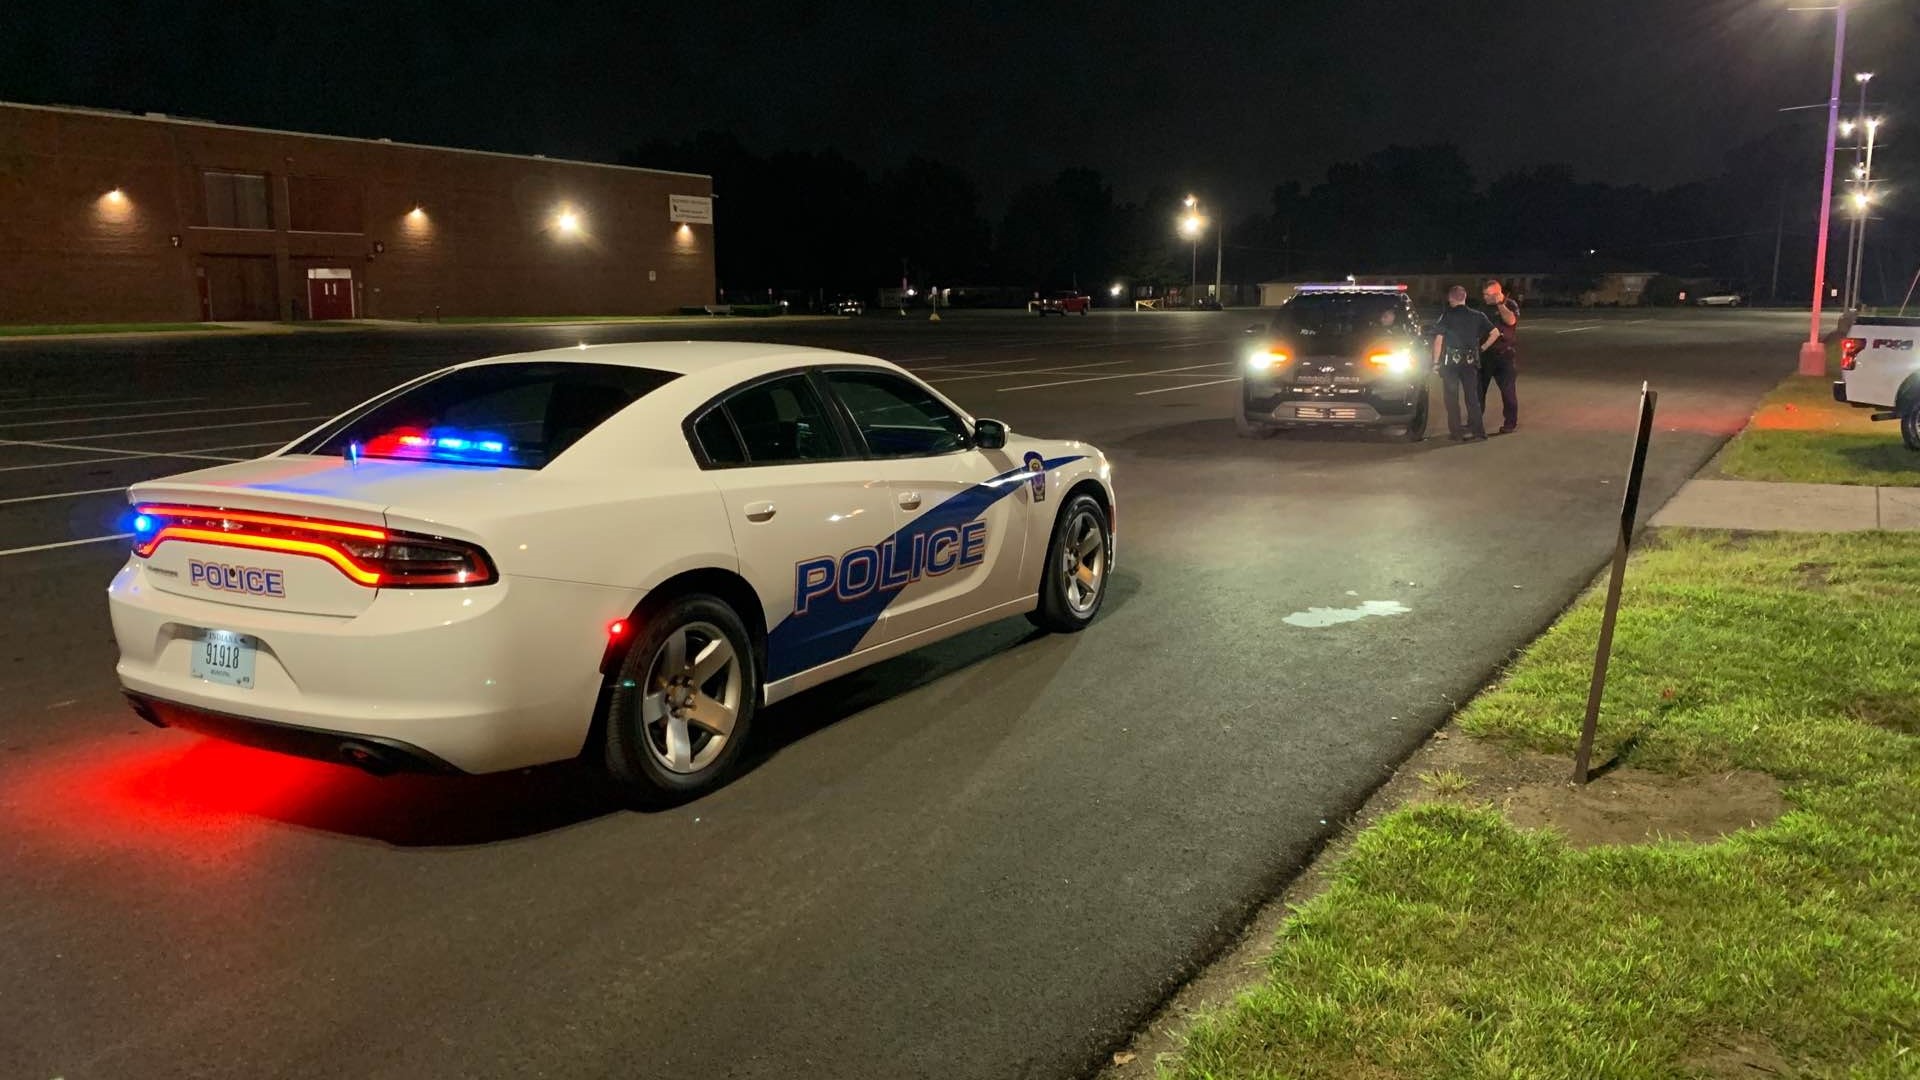 At the end of the Southport High School homecoming dance, there was a fight in the parking lot. In the aftermath, a student was tased, the district said.